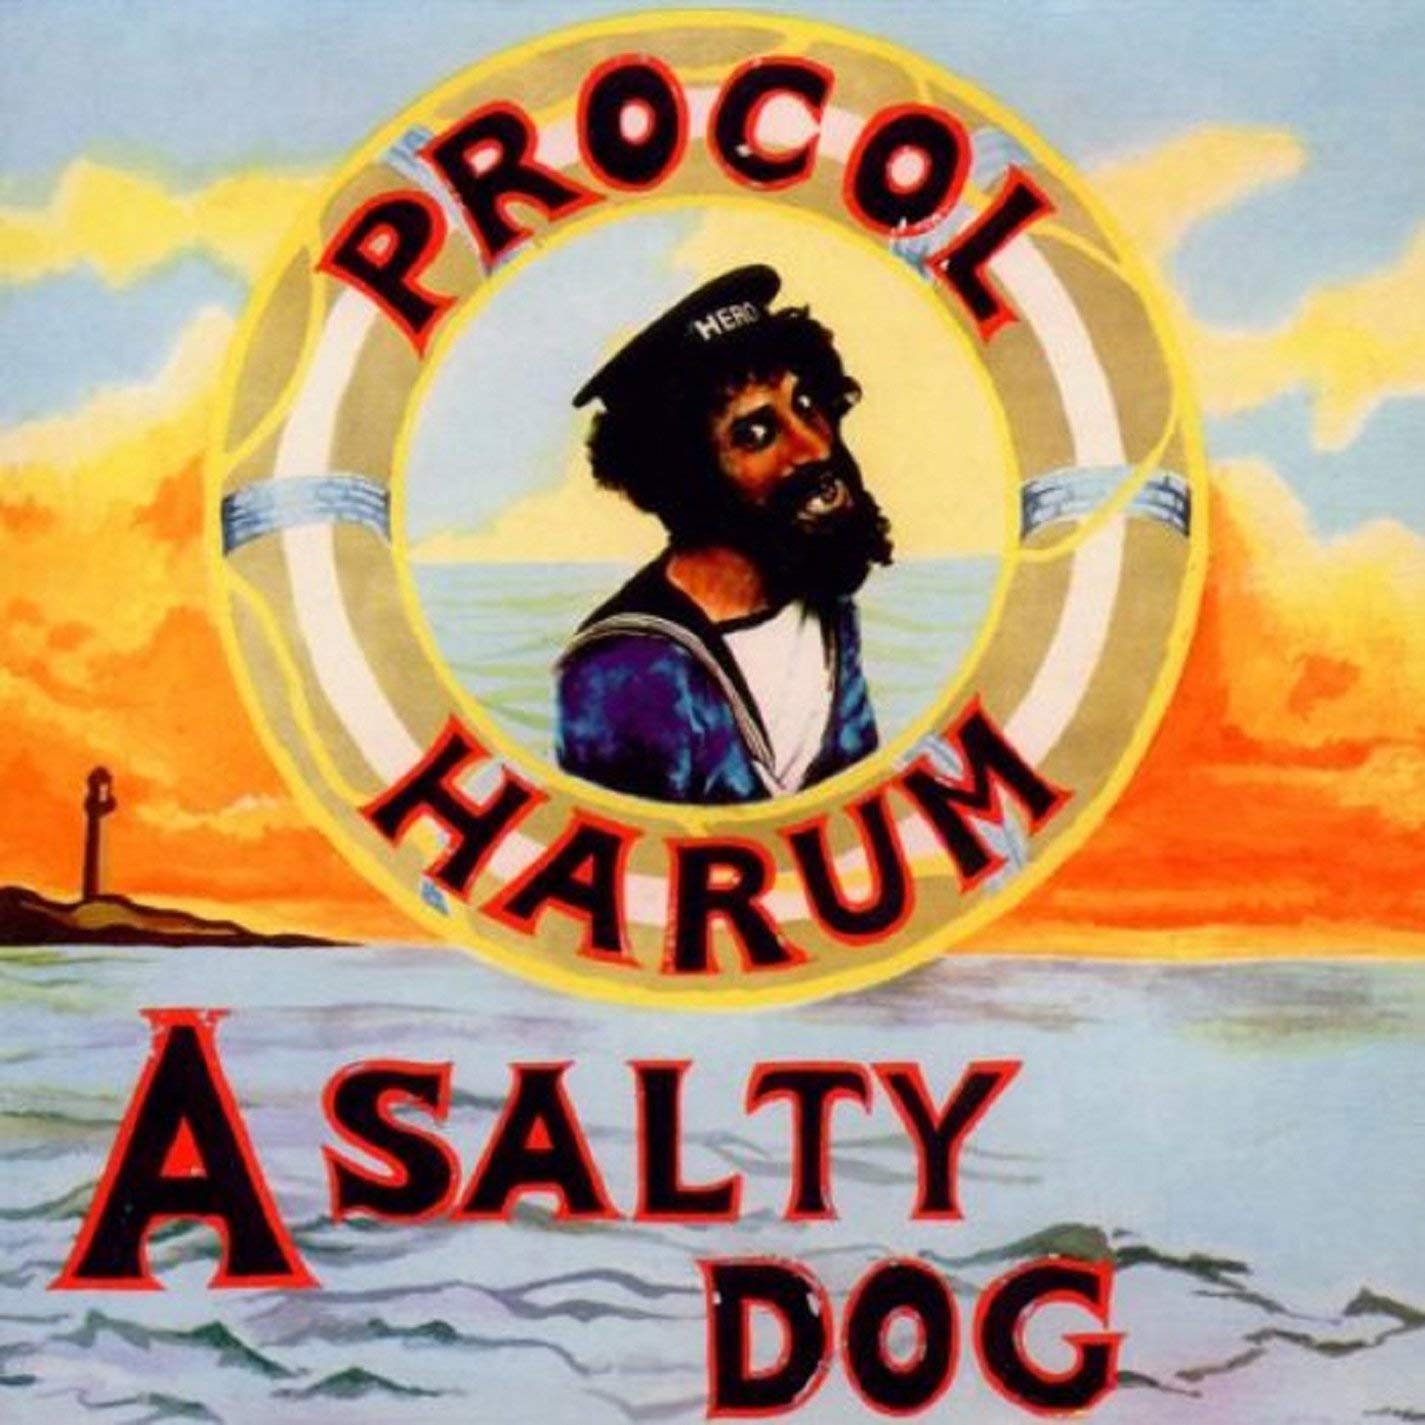 CD - Procol Harum - A Salty Dog Expanded